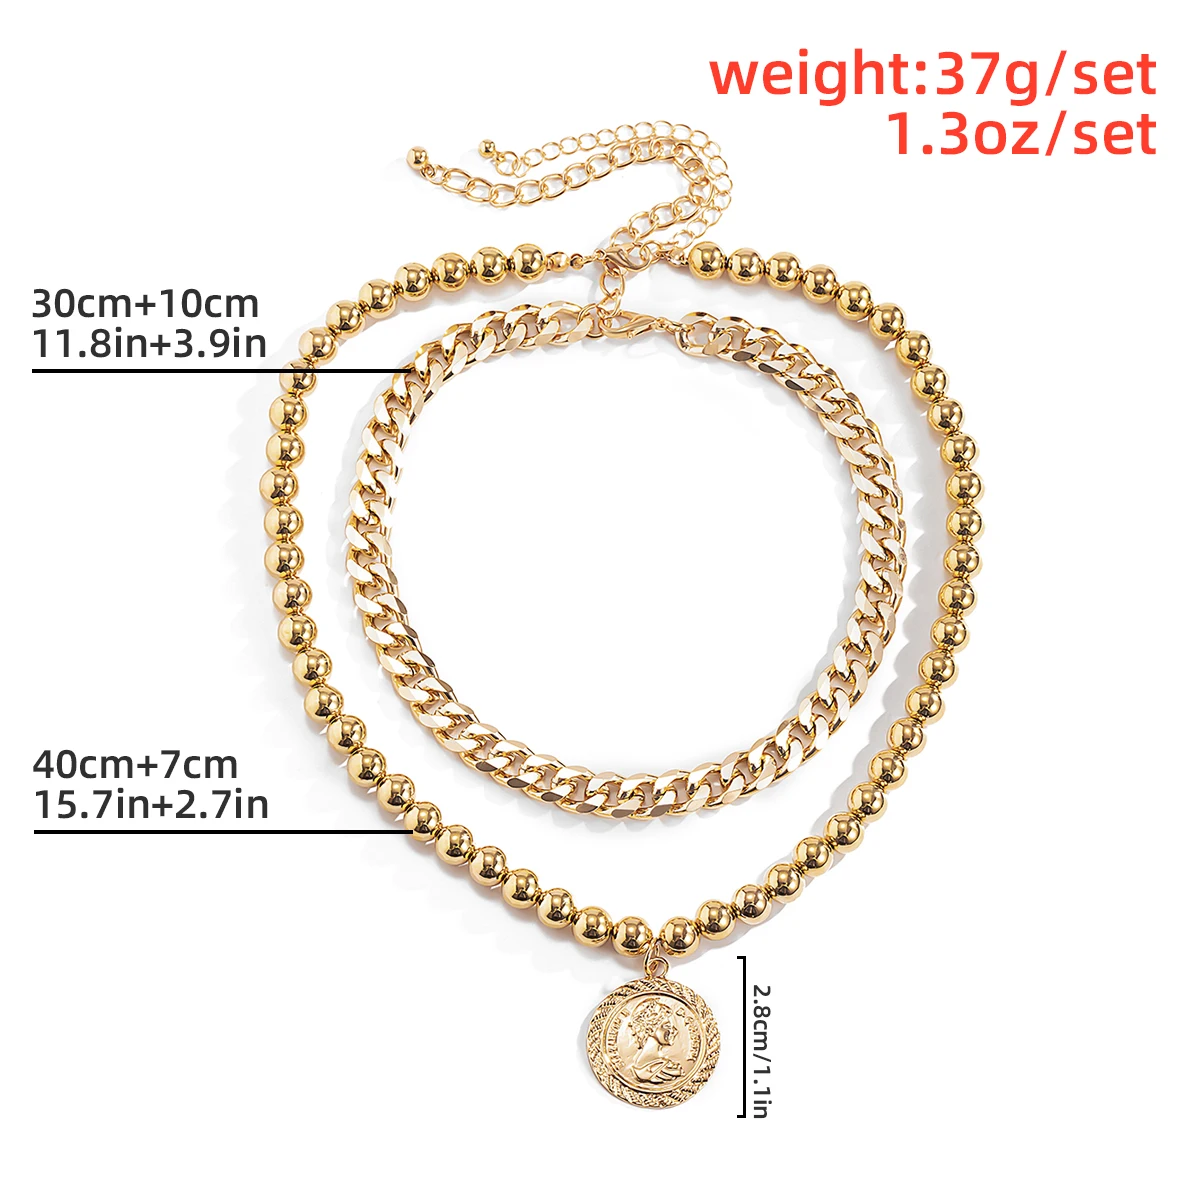 

Lacteo Steampunk Aluminum Clavicle Chain Choker Necklace For Women 2021 Fashion Vintage Carved Coin Virgin Mary Statue Necklace